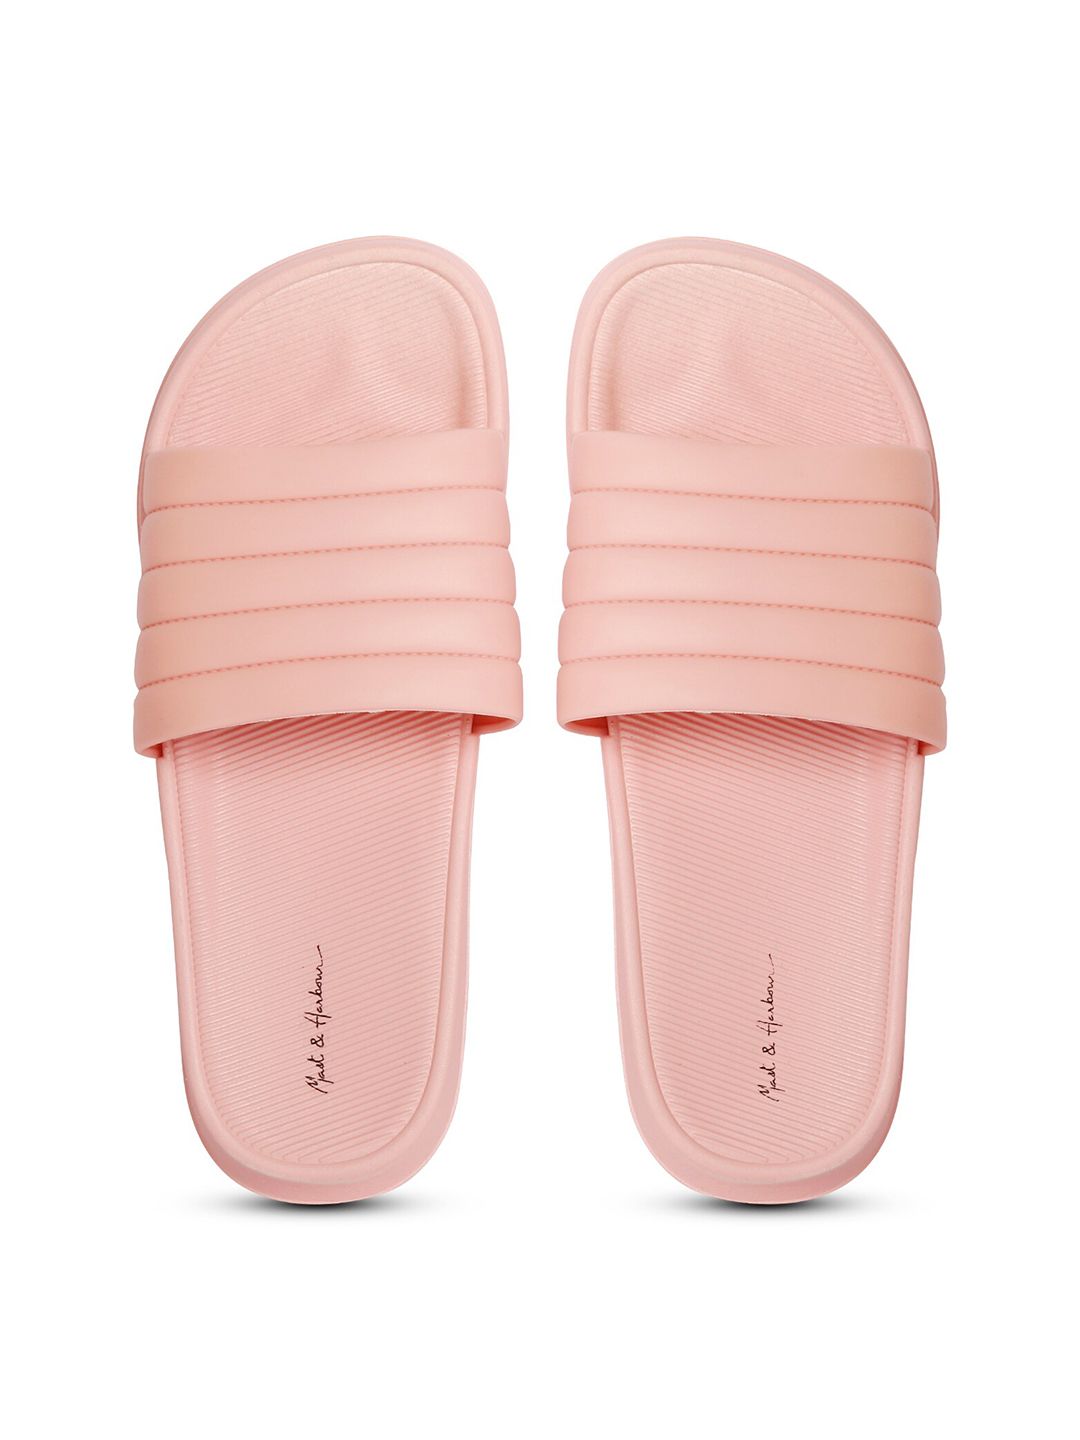 Mast & Harbour Women Pink Striped Sliders Price in India